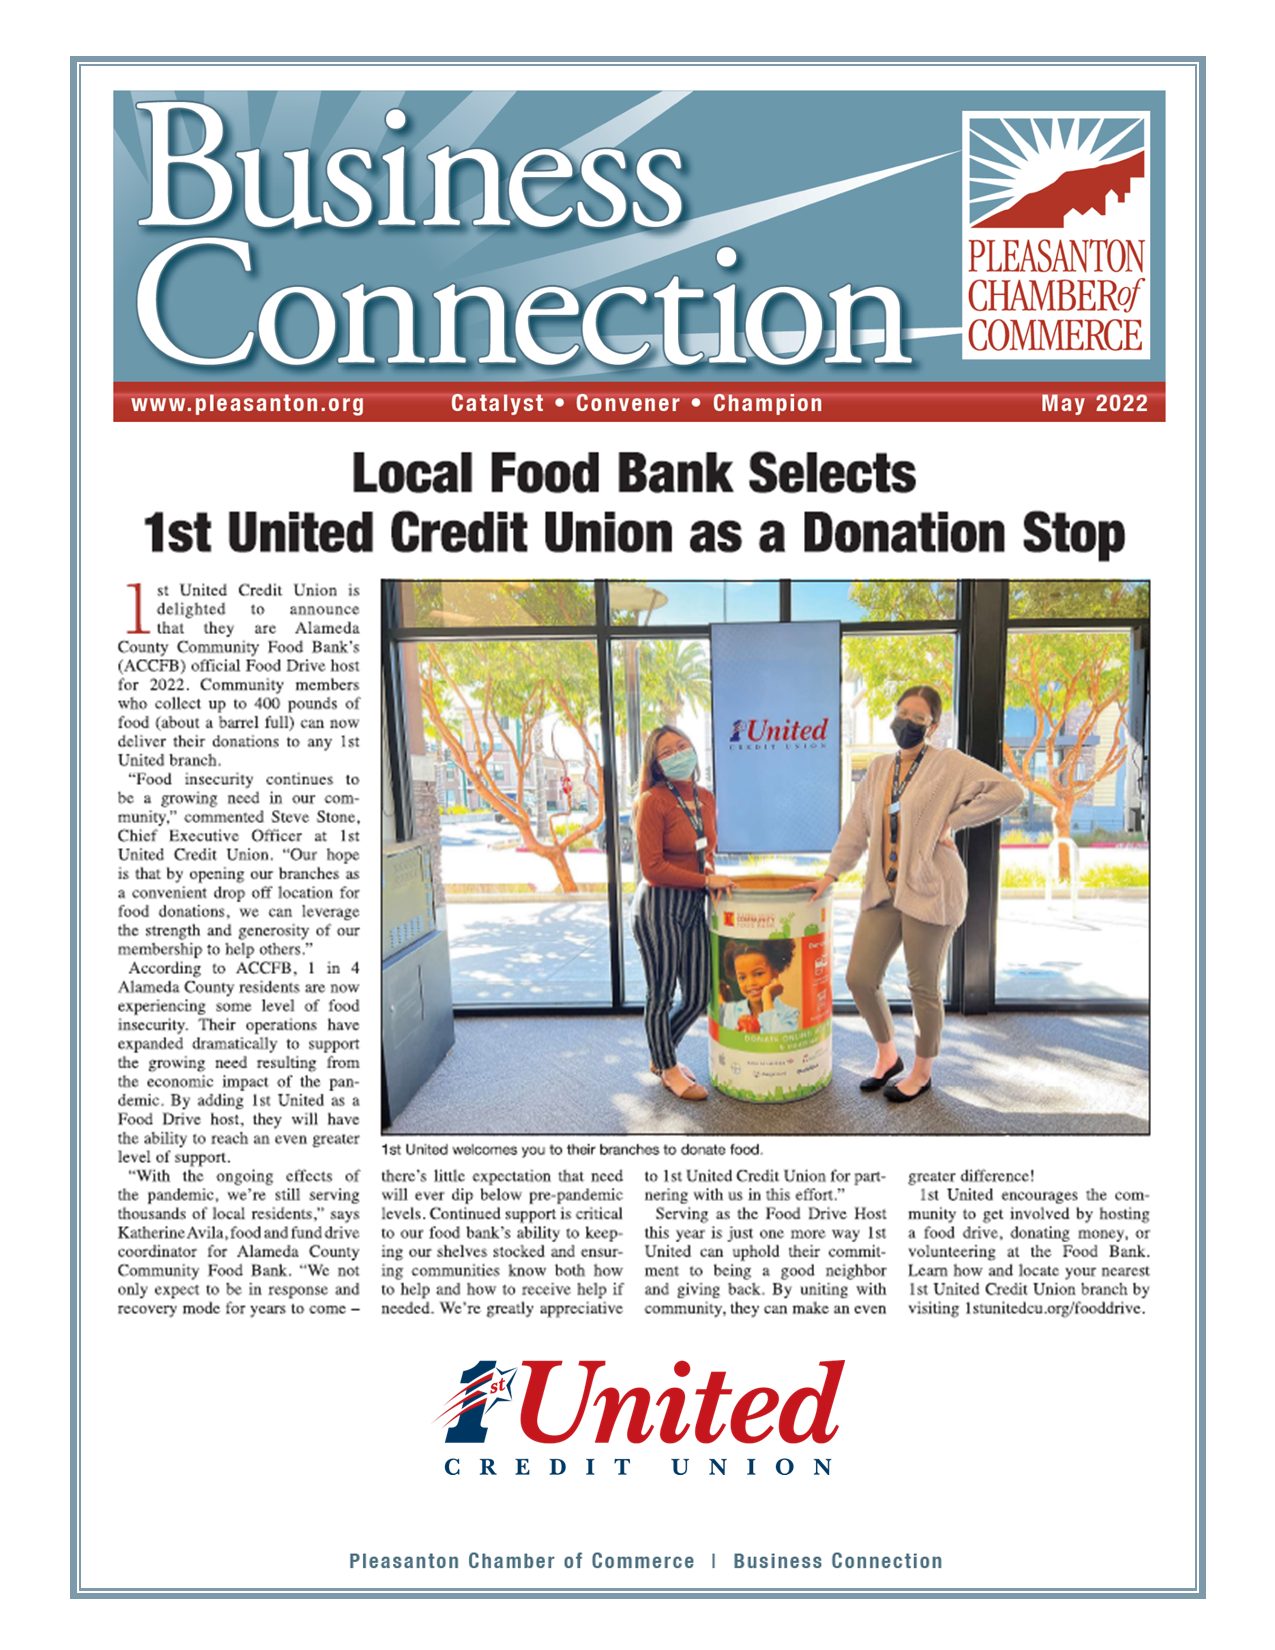 1st United Credit Union article